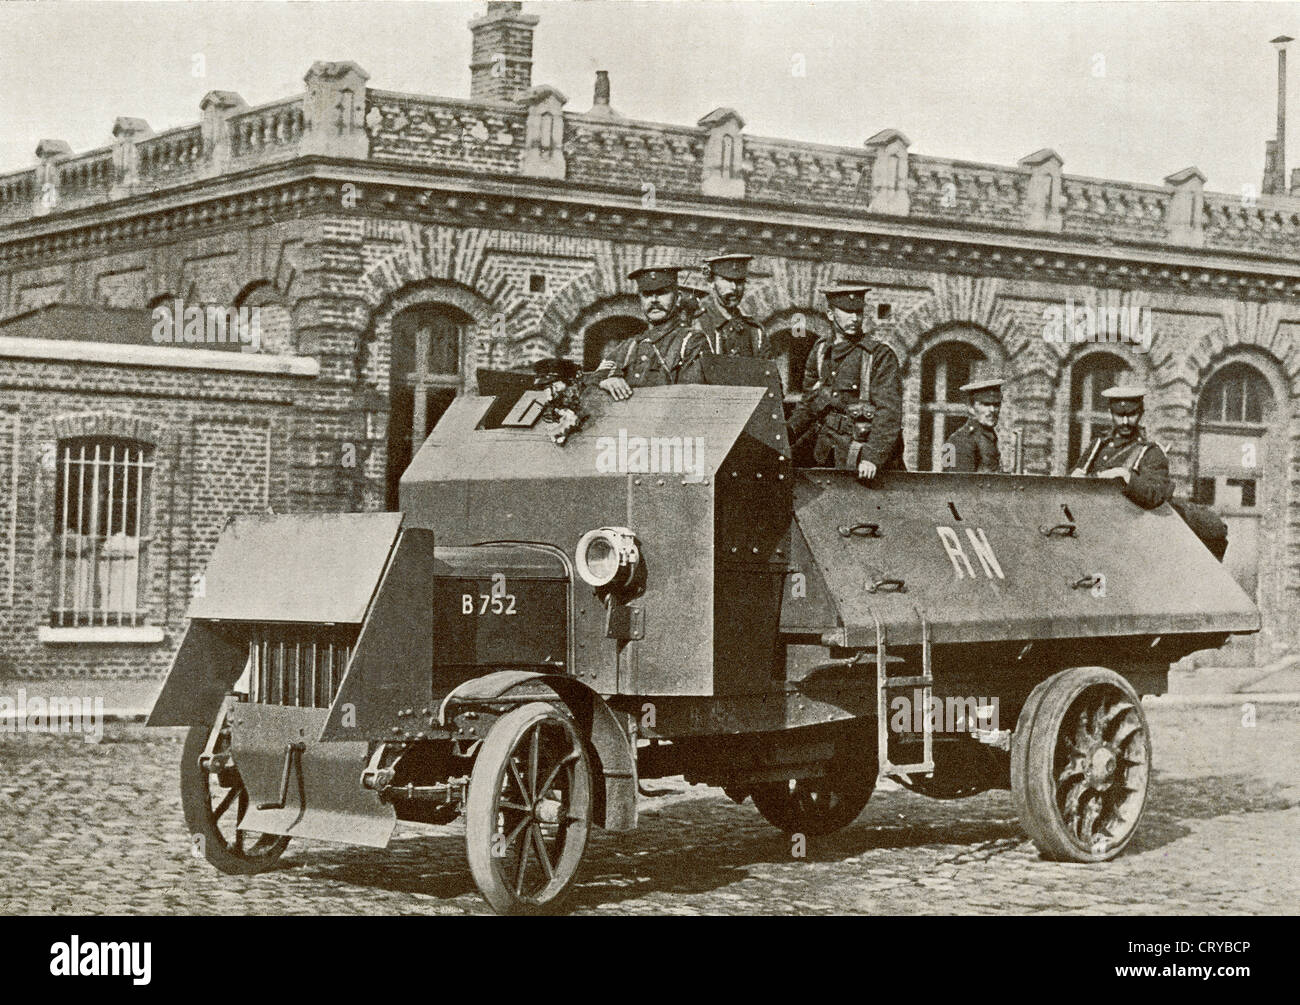 A British Armoured Motor in 1914 during World War I. From The Year 1914 Illustrated. Stock Photo